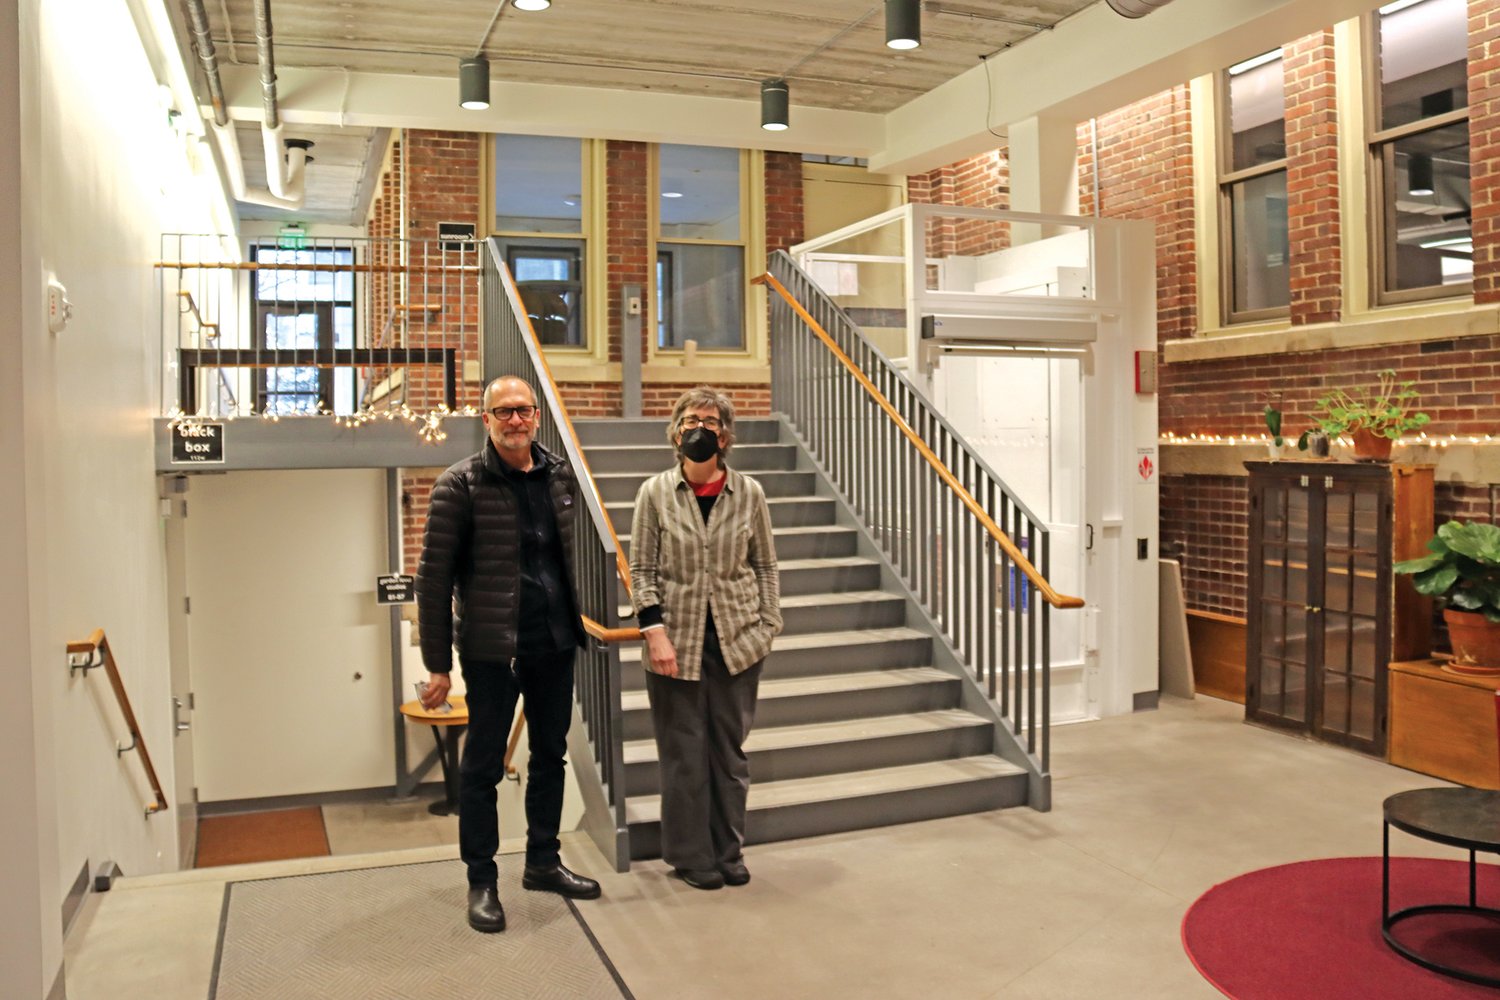 Marcelo Pinto (left) of Alliiance and Jackie Hayes of the Center for Performing Arts stand in the space that bridges old and new. An elevator was added to aid accessibility. (Photos by Tesha M. Christensen)